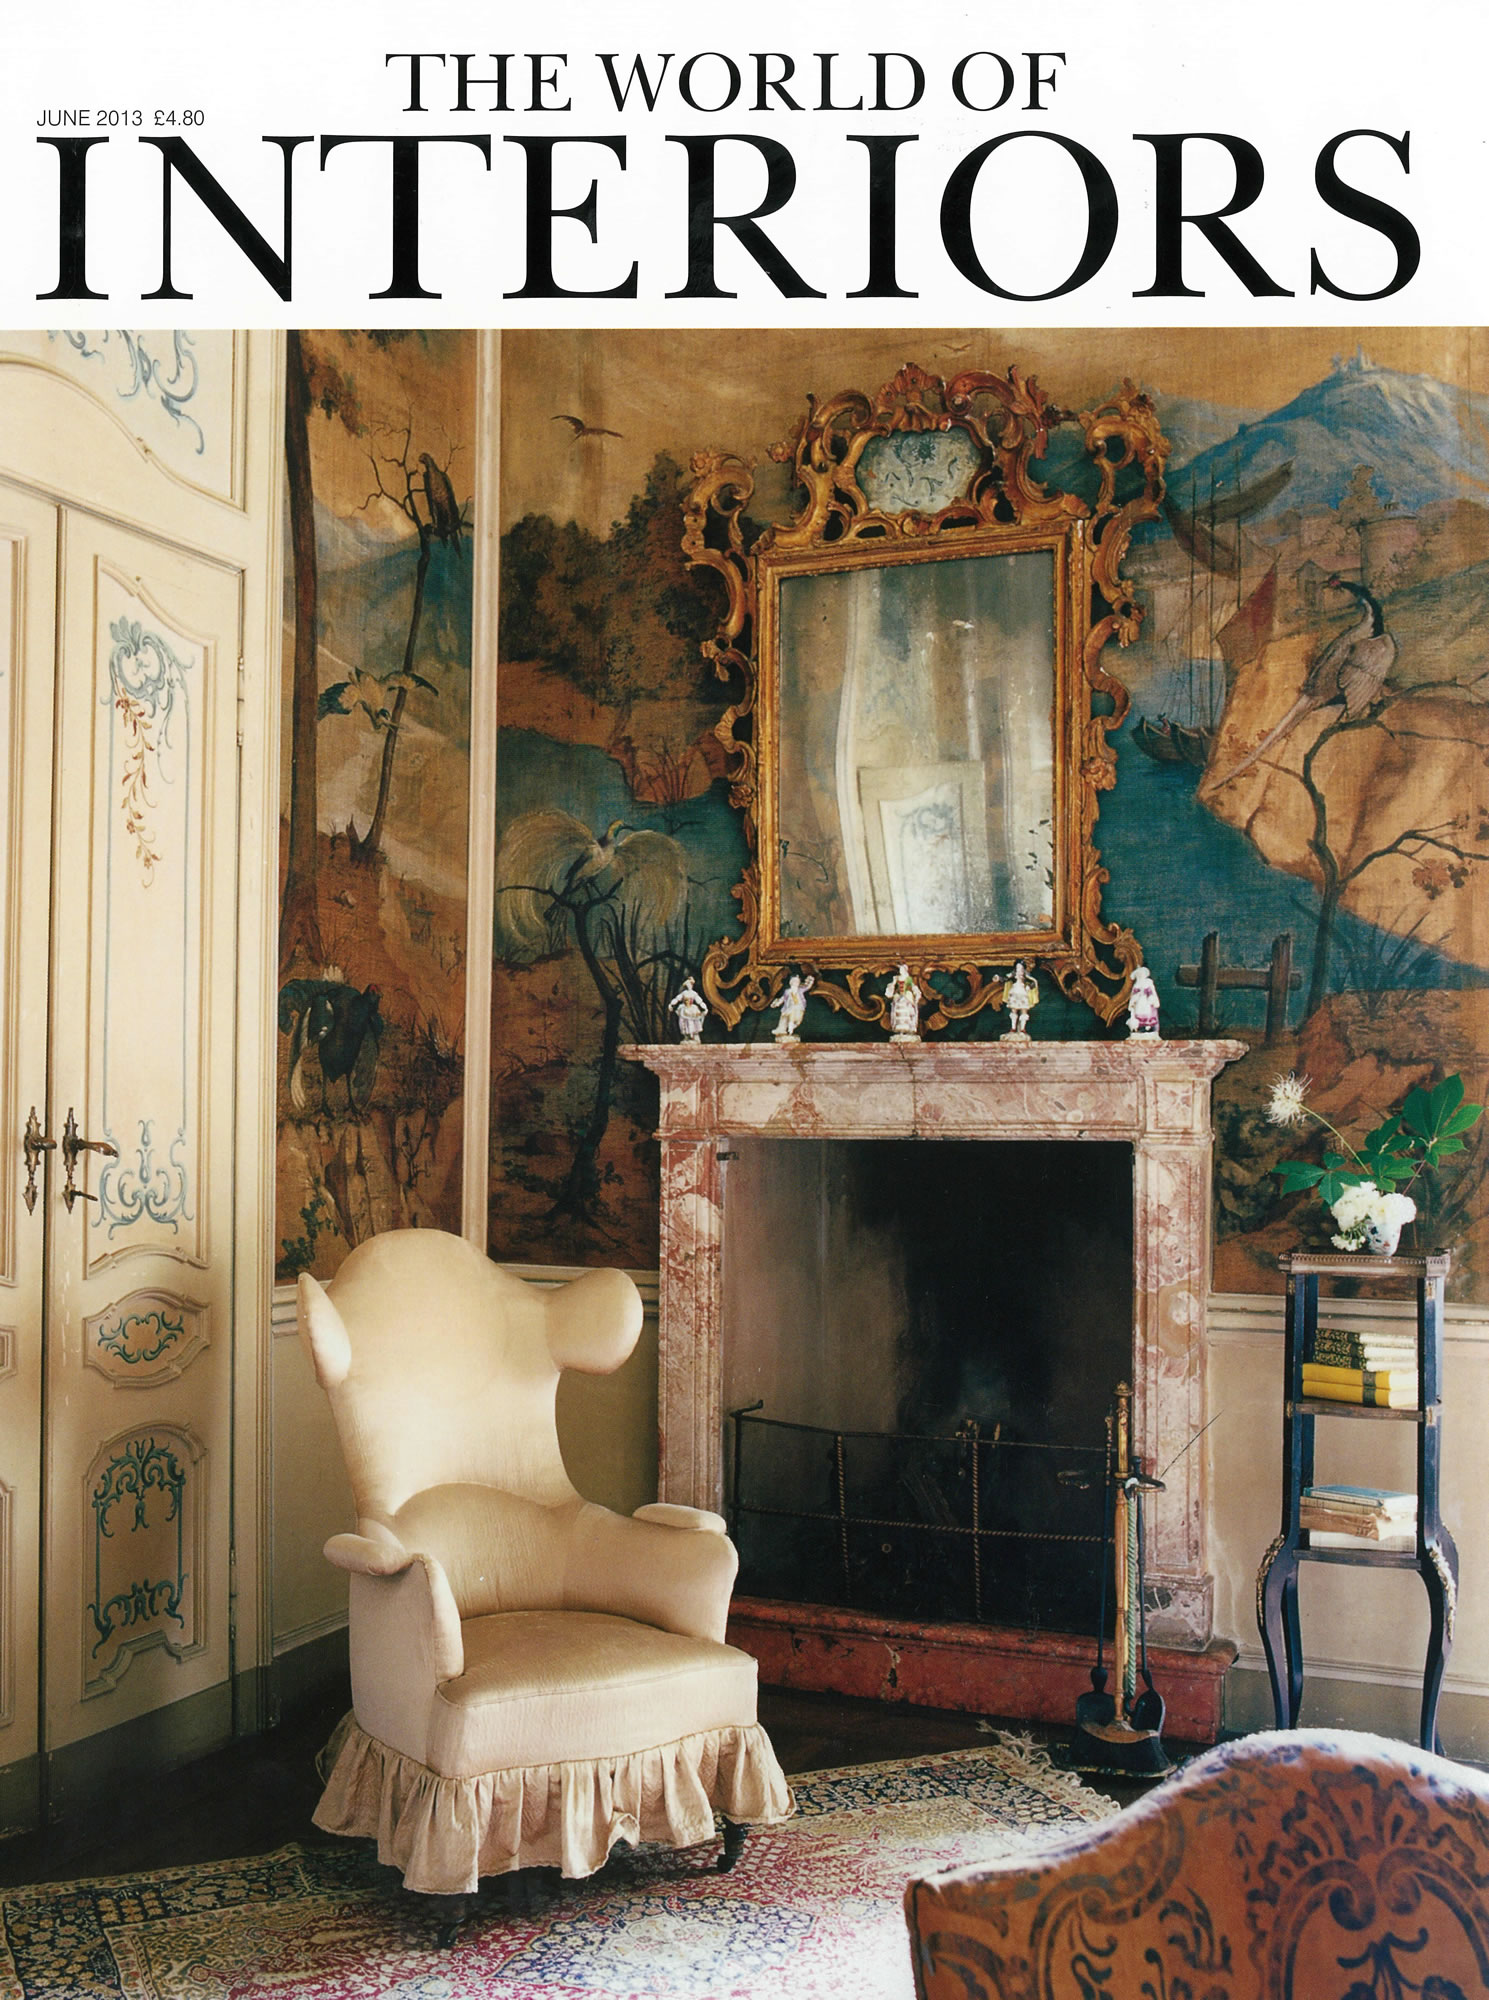 The World of Interiors FP June 2013